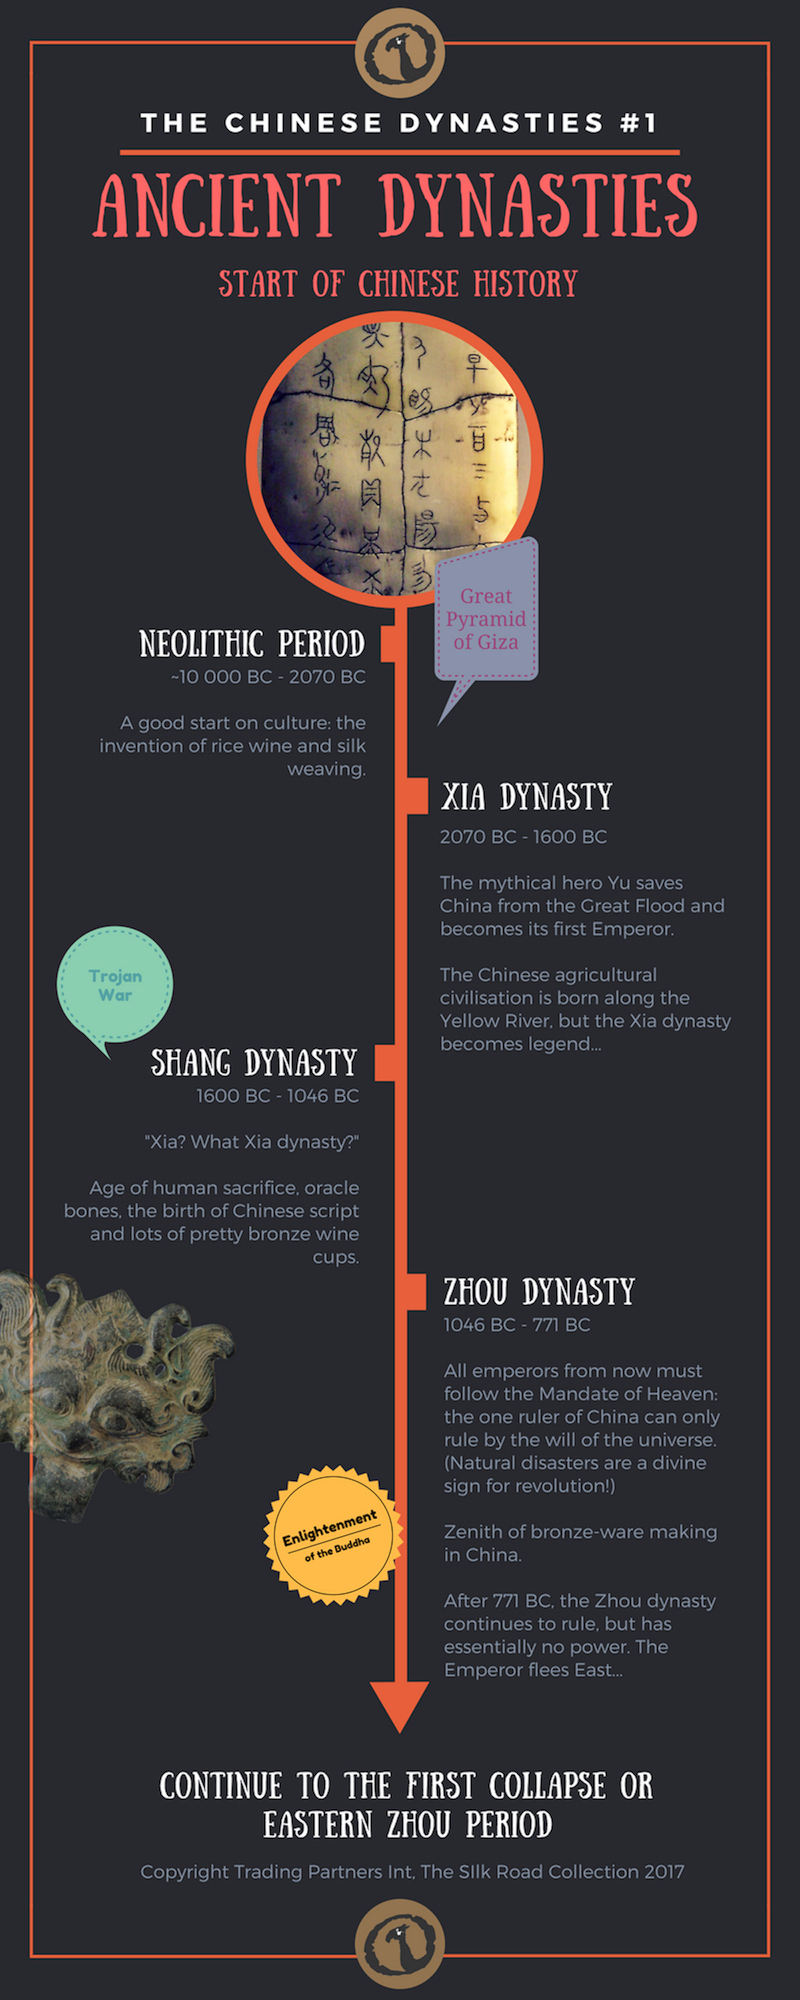 Timeline image of The Chinese Dynasties: Start of Chinese history